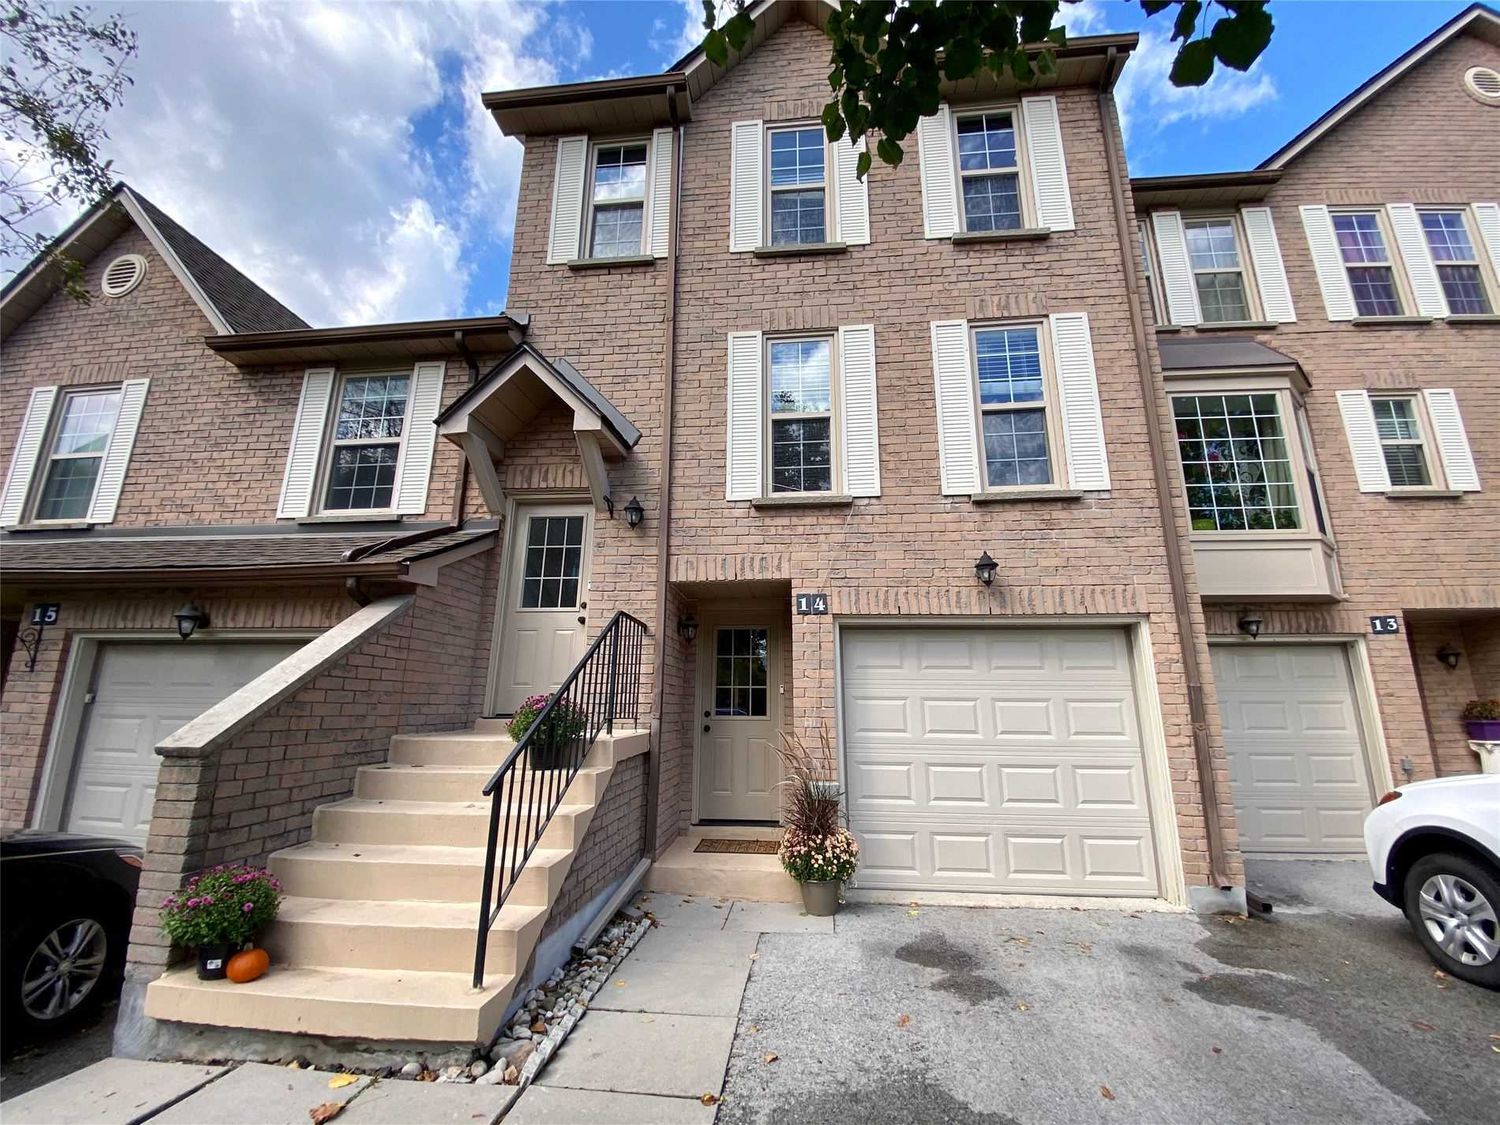 2272 Mowat Avenue. 2272 Mowat Avenue Townhomes is located in  Oakville, Toronto - image #2 of 2